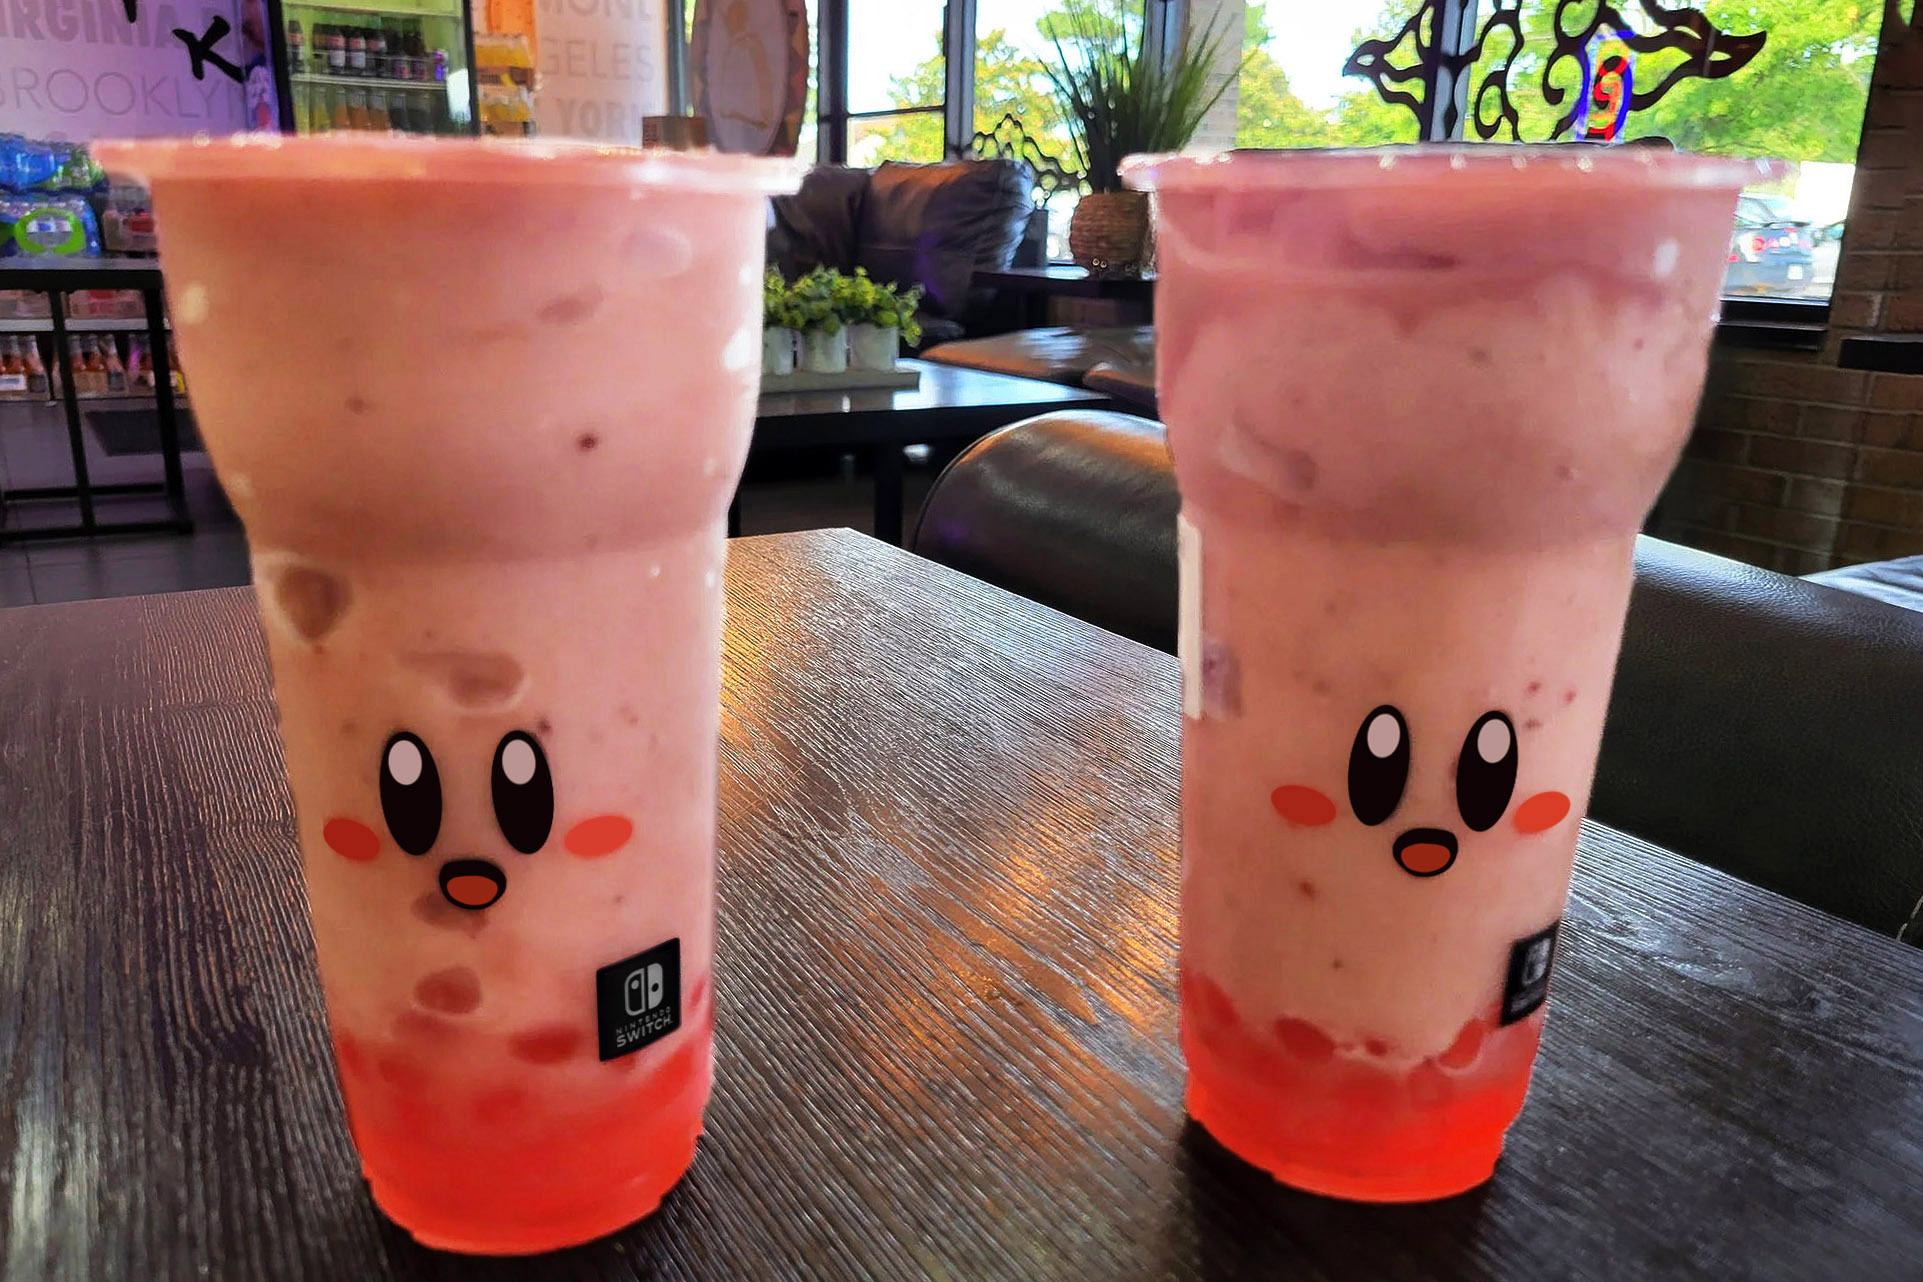  I drank the new Kirby-flavored bubble tea and its as sweet as he is